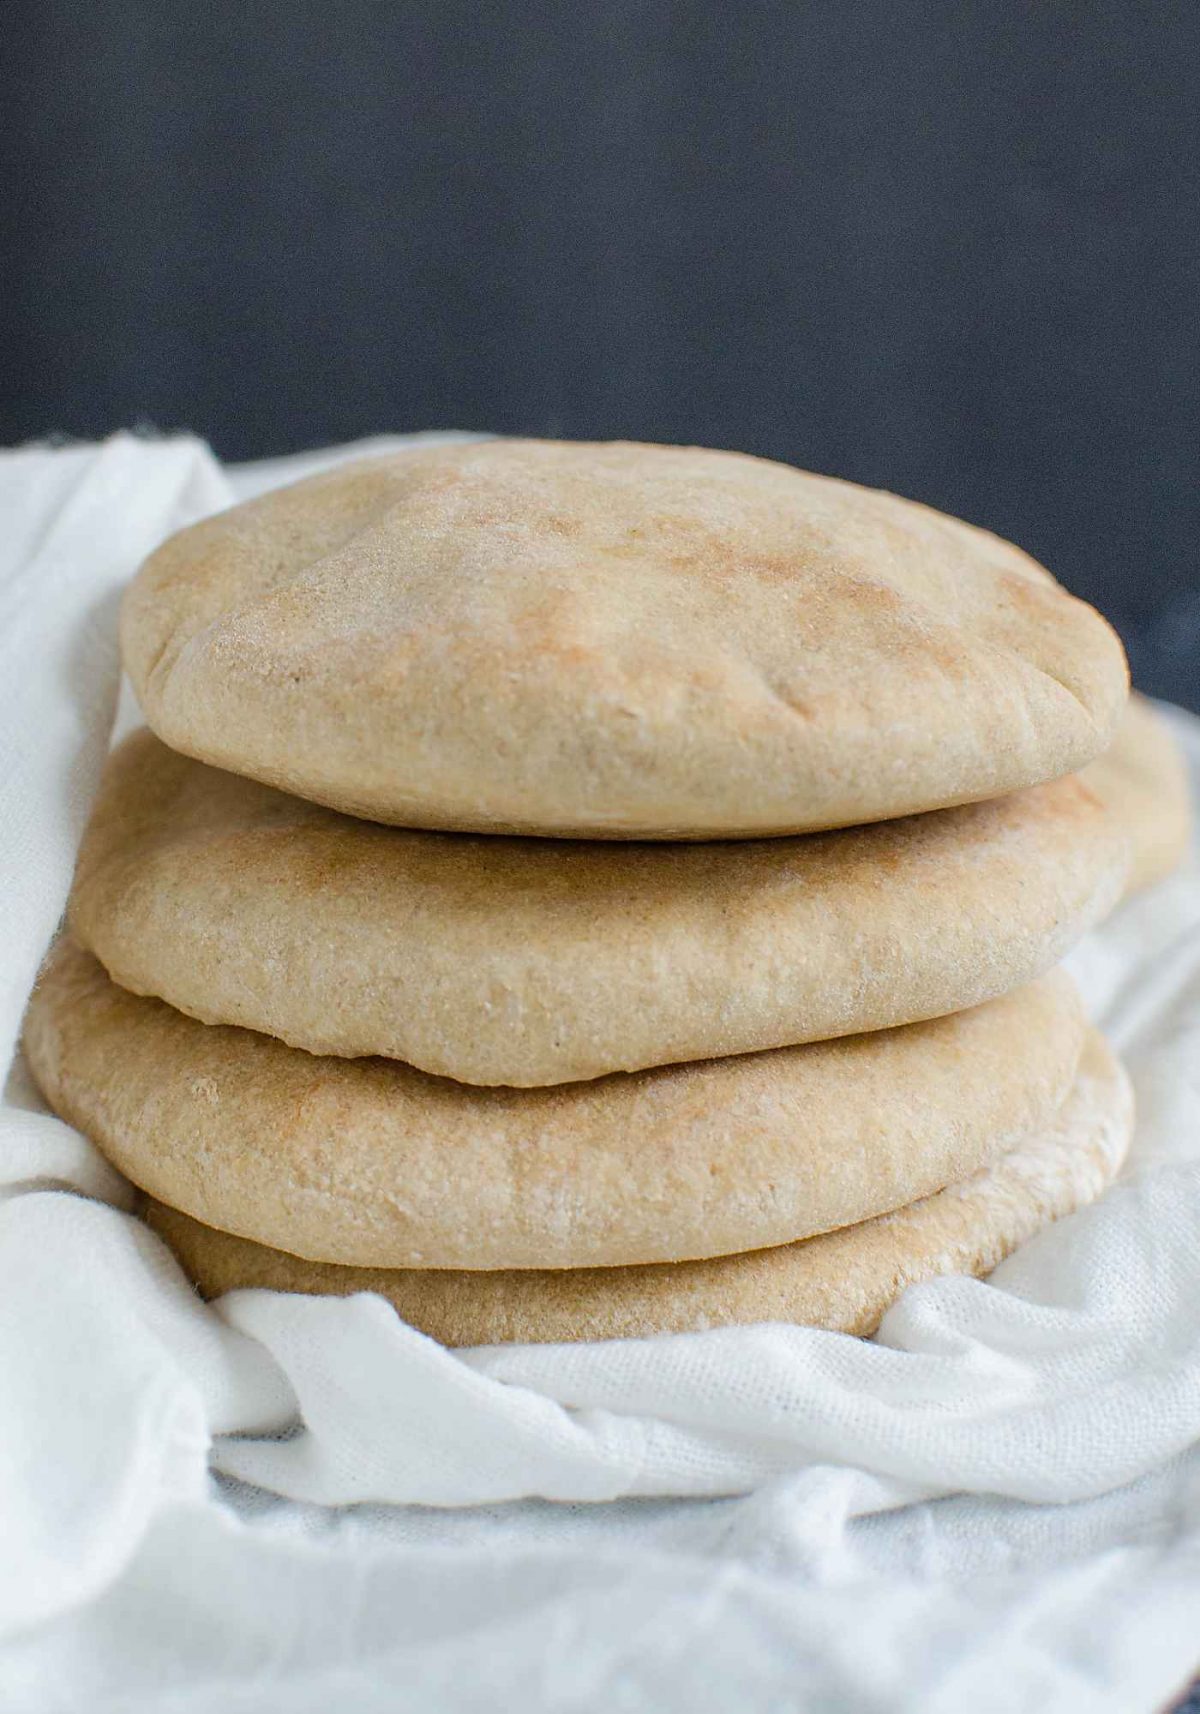 Healthy and delicious whole wheat pita bread. Try them with homemade hummus or turn them into pita chips